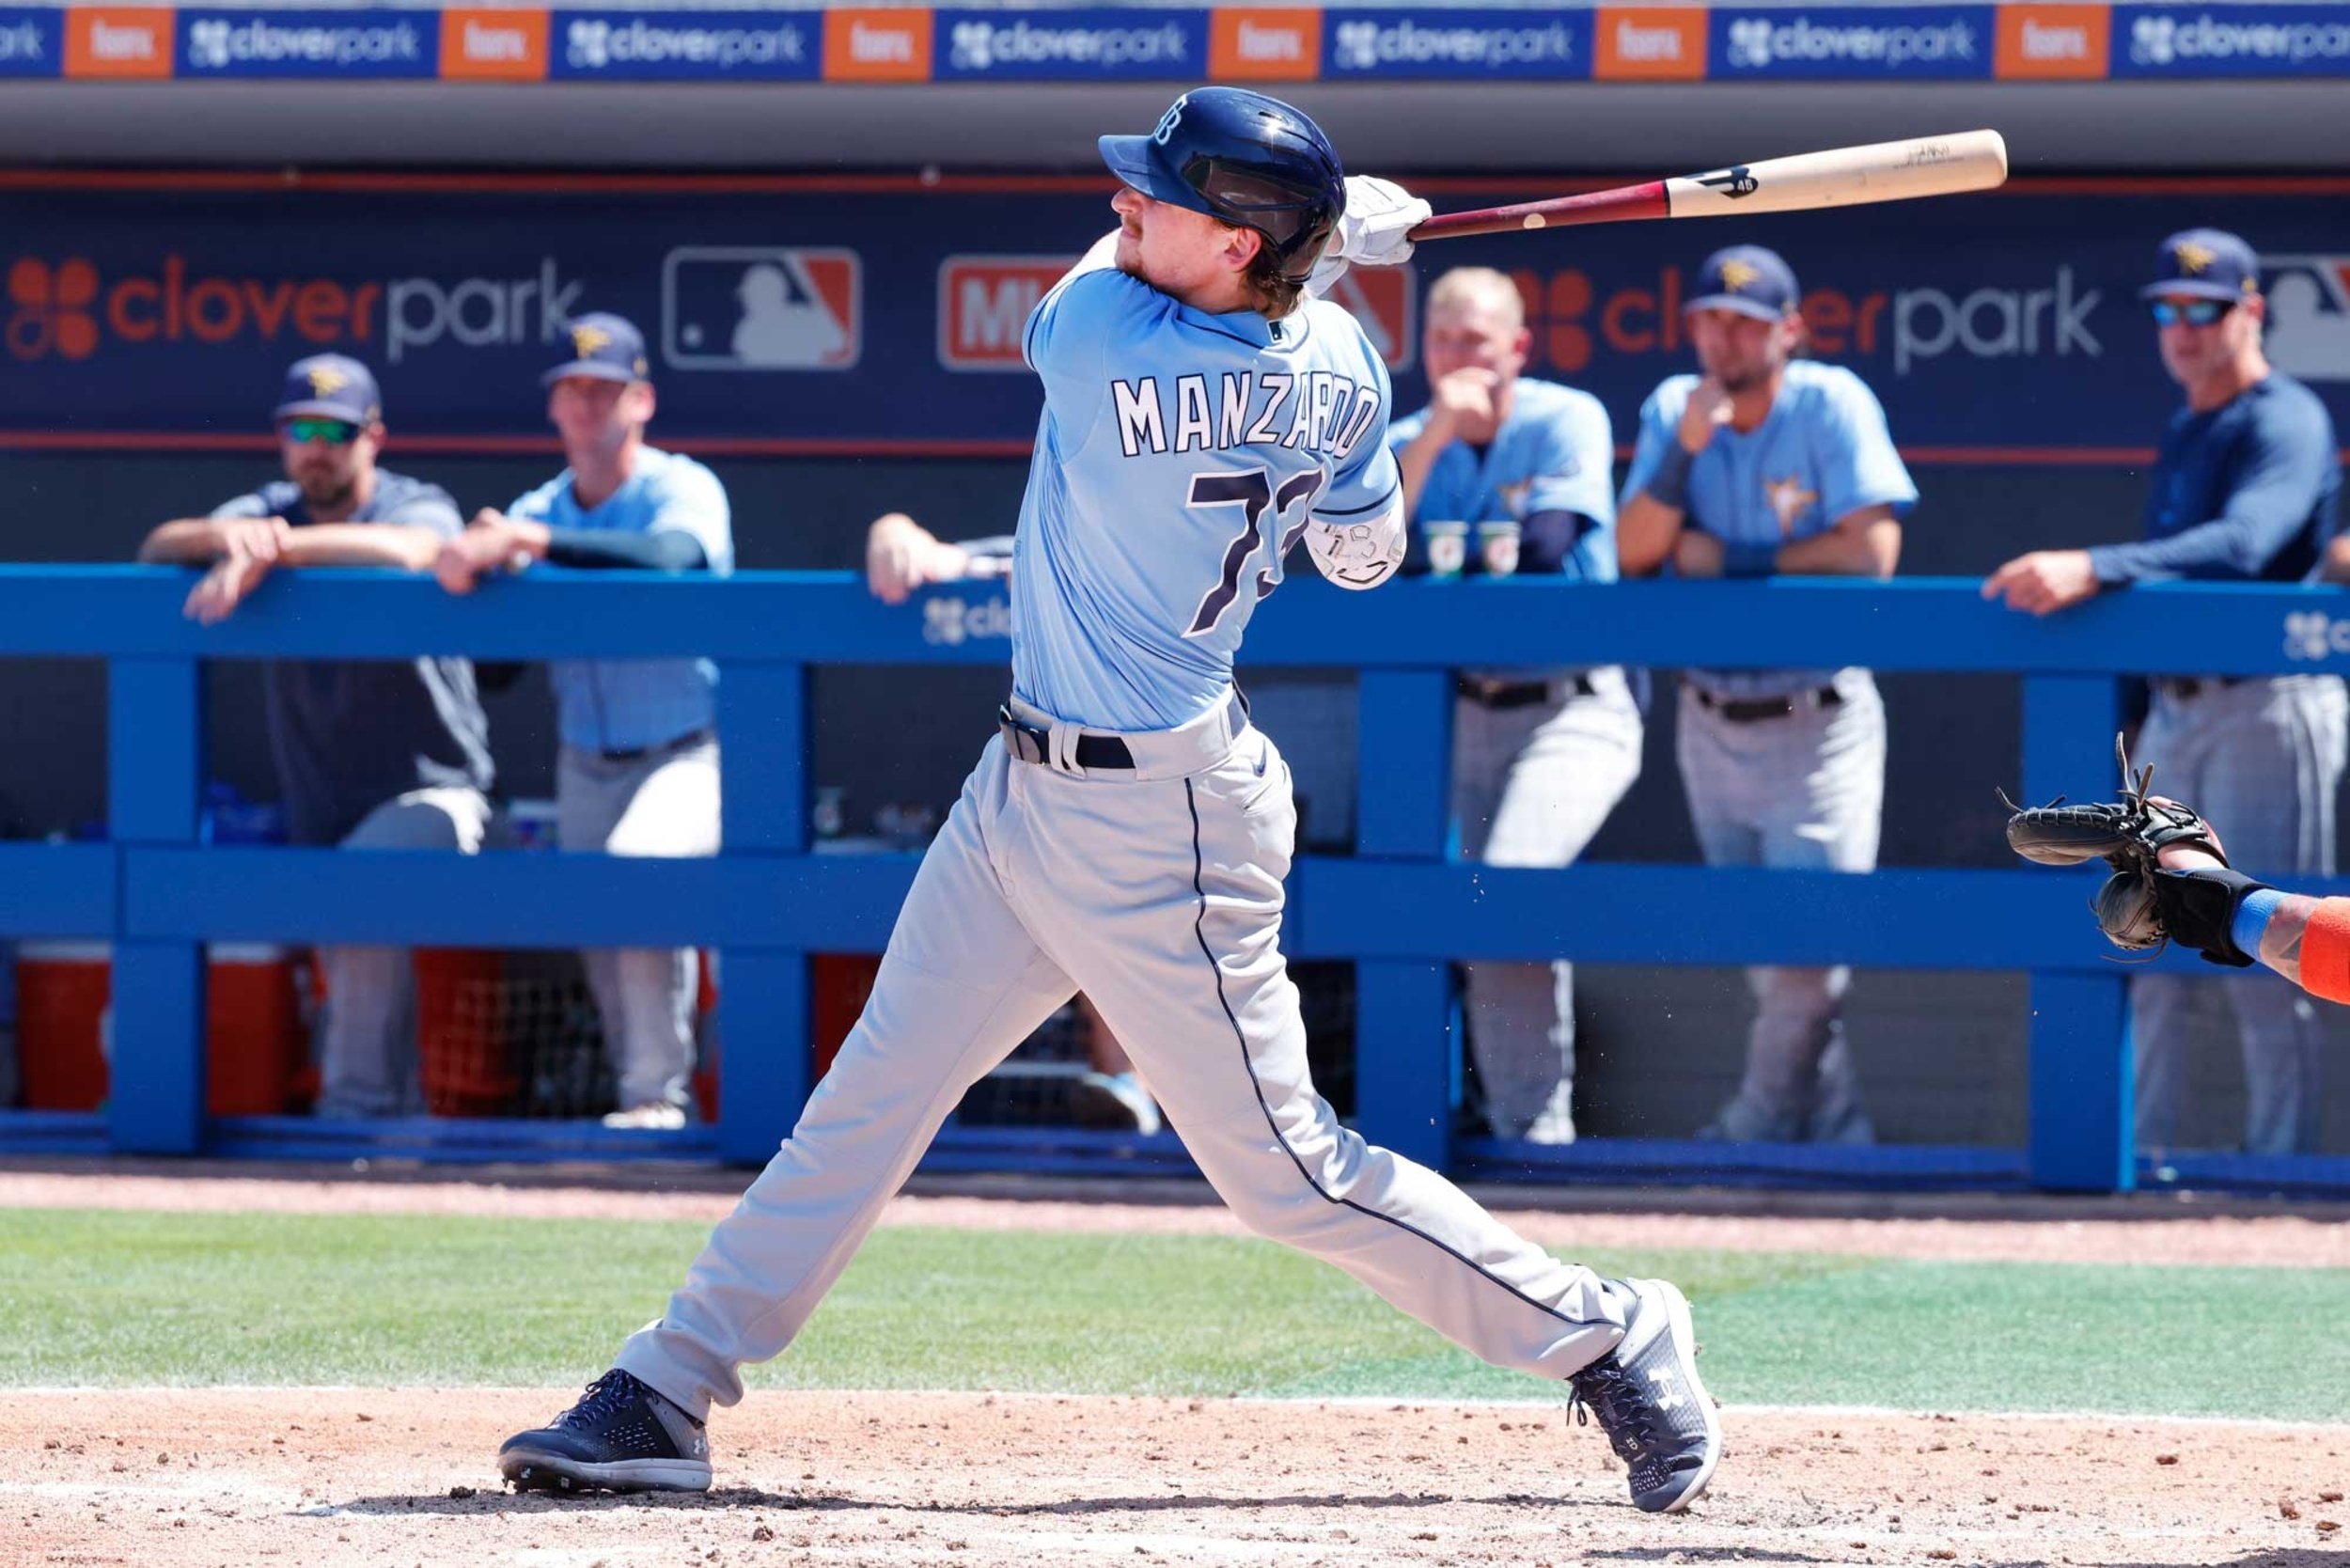 <p>The anemic Guardians offense is in desperate need of a middle of the order hitter, and Manzardo shows that potential. The former Rays farmhand has shown big power over the last two minor league seasons and will battle for a share of the first base and DH duties in Spring Training.</p><p><a href='https://www.msn.com/en-us/community/channel/vid-cj9pqbr0vn9in2b6ddcd8sfgpfq6x6utp44fssrv6mc2gtybw0us'>Follow us on MSN to see more of our exclusive MLB content.</a></p>